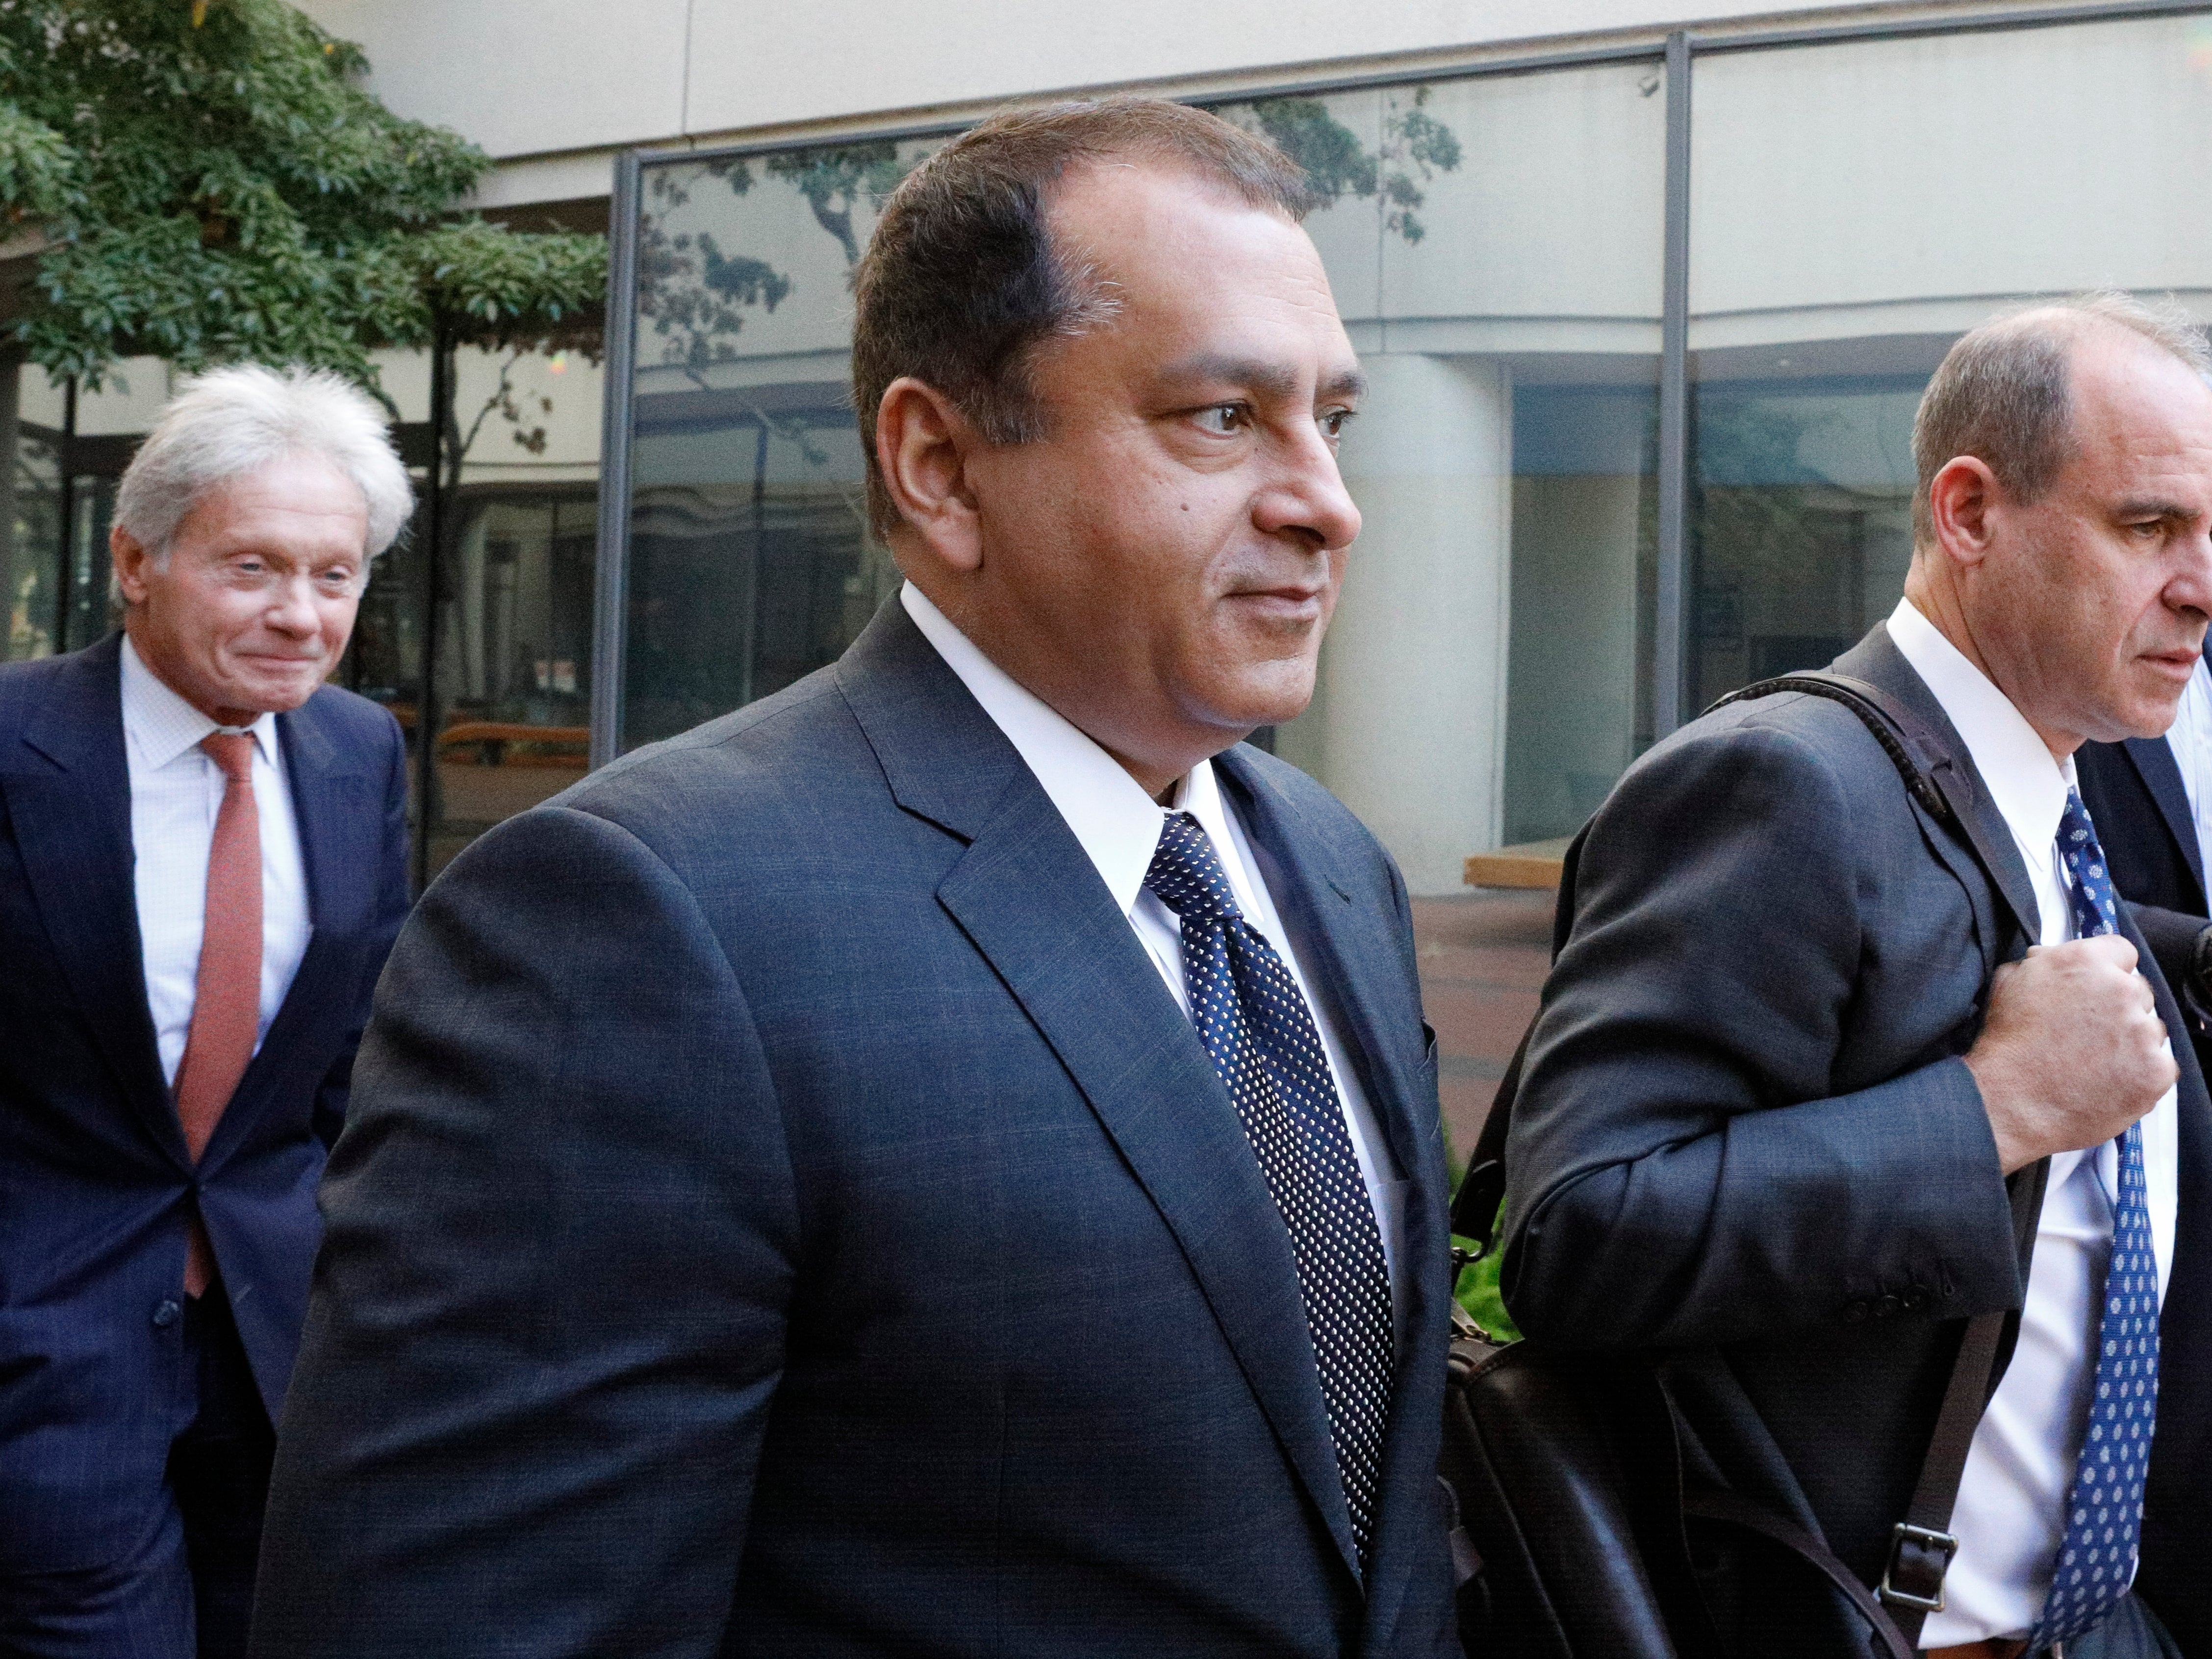 Former Theranos COO Ramesh Balwani appears in federal court for a status hearing on July 17, 2019 in San Jose, California